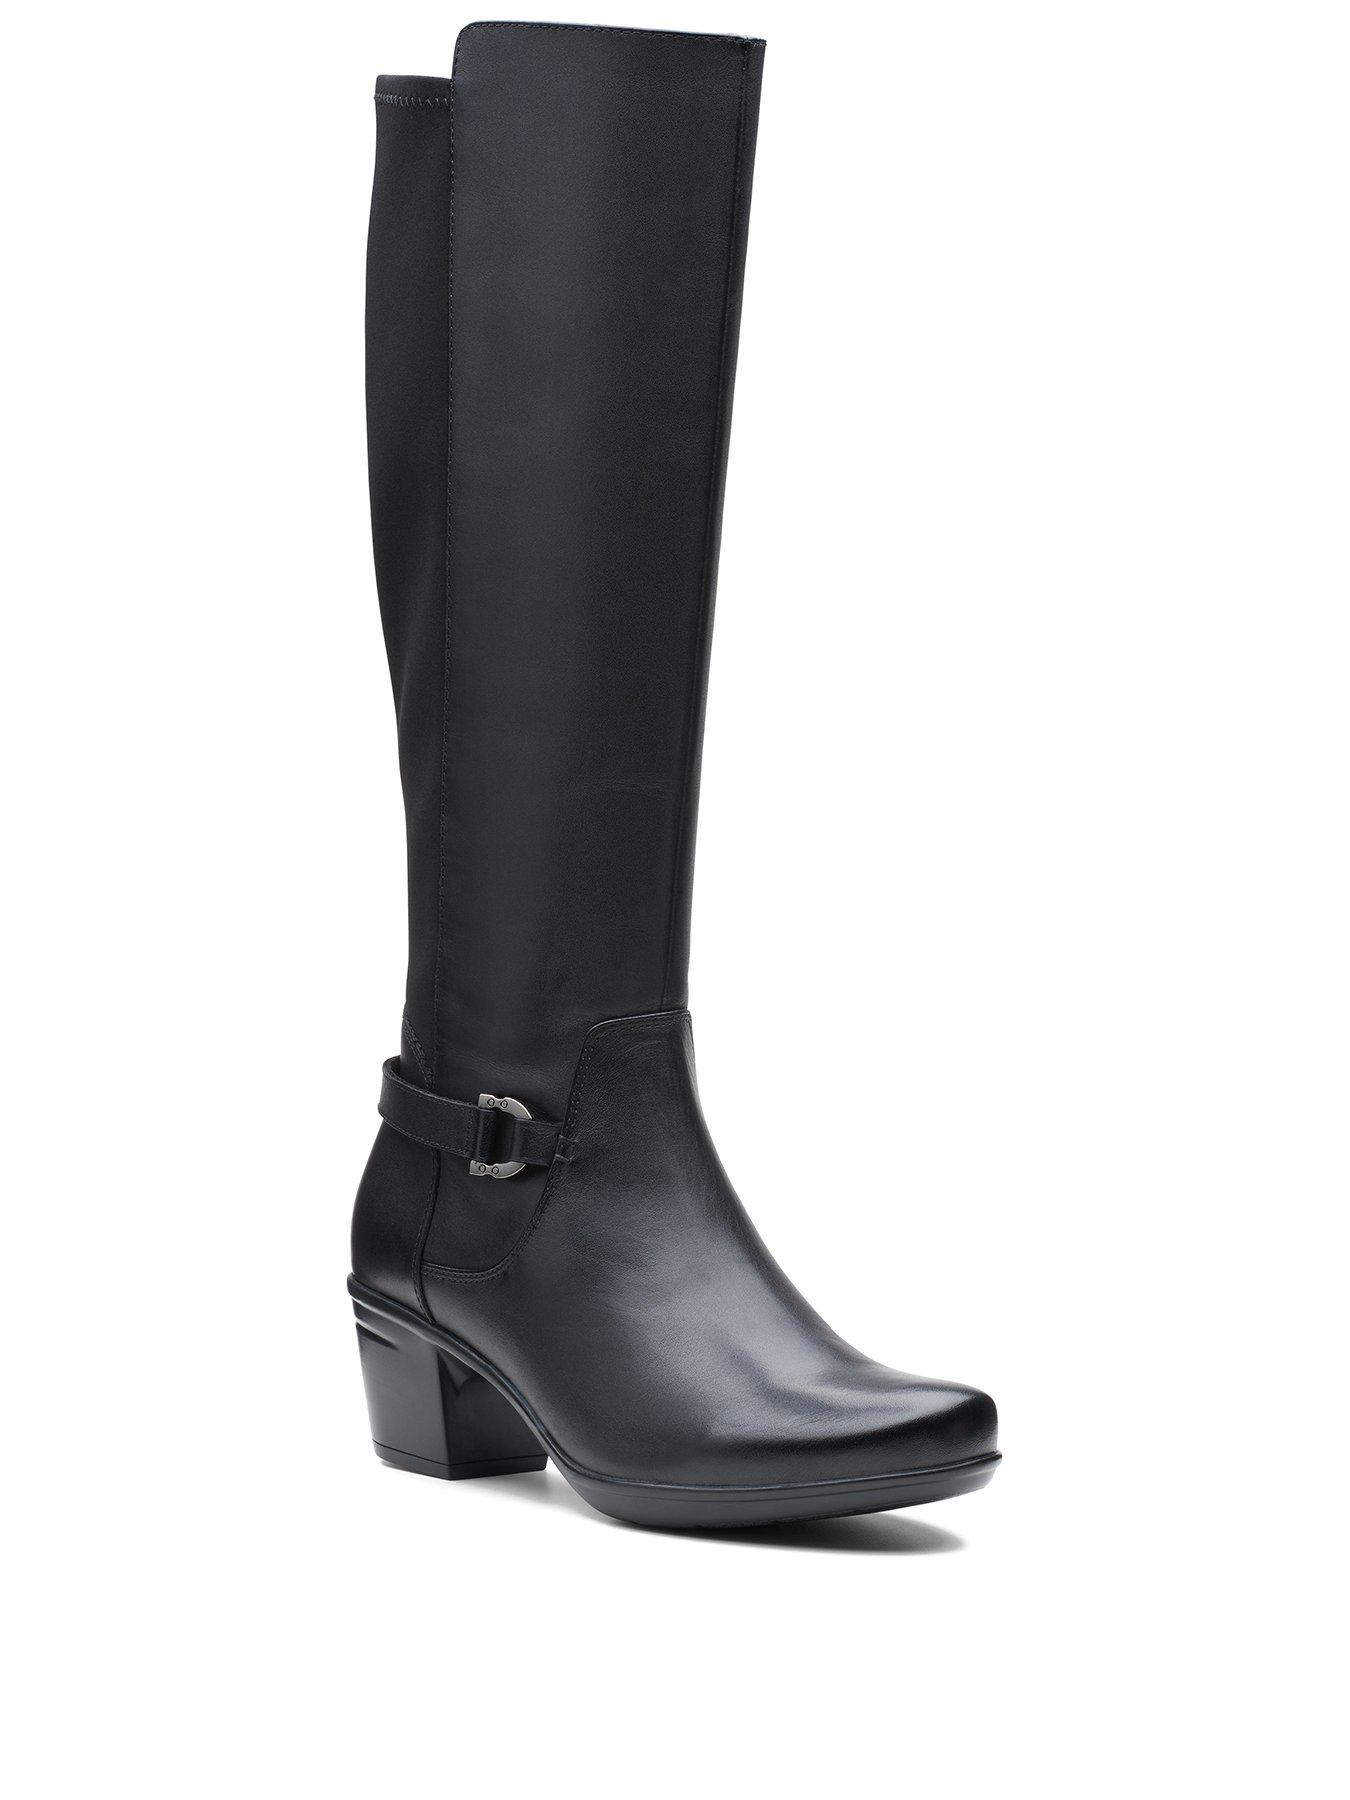 clarks leather tall wedge boots portrait merla